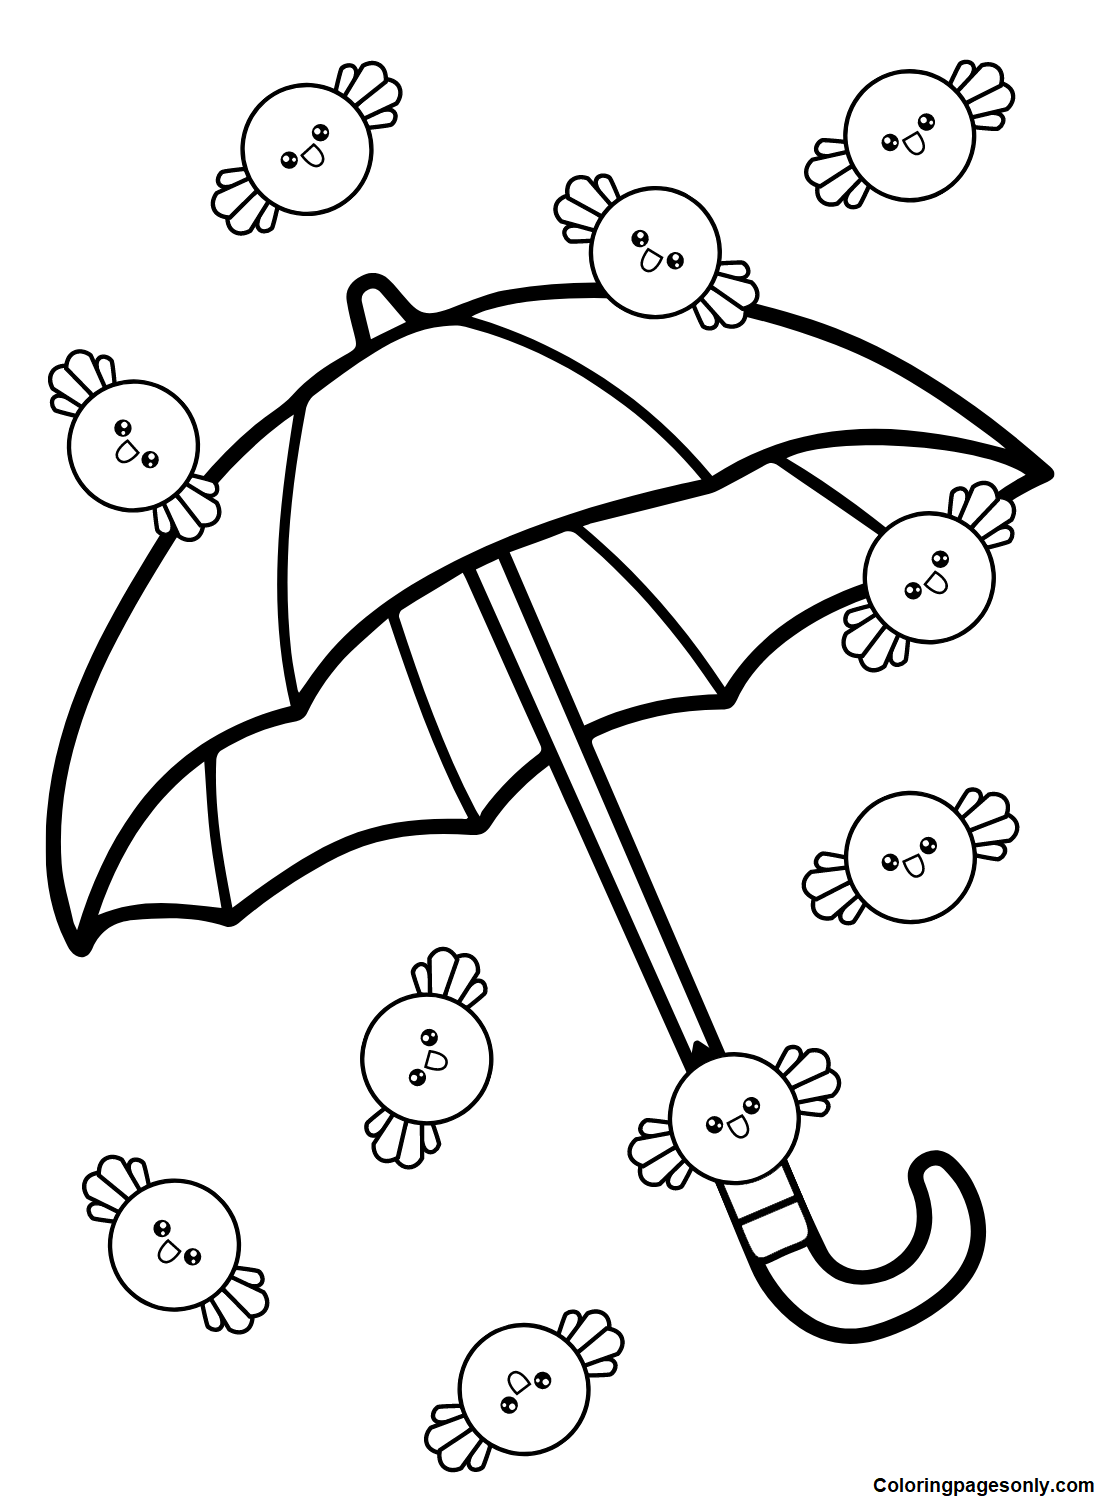 Umbrella for Kids Coloring Page